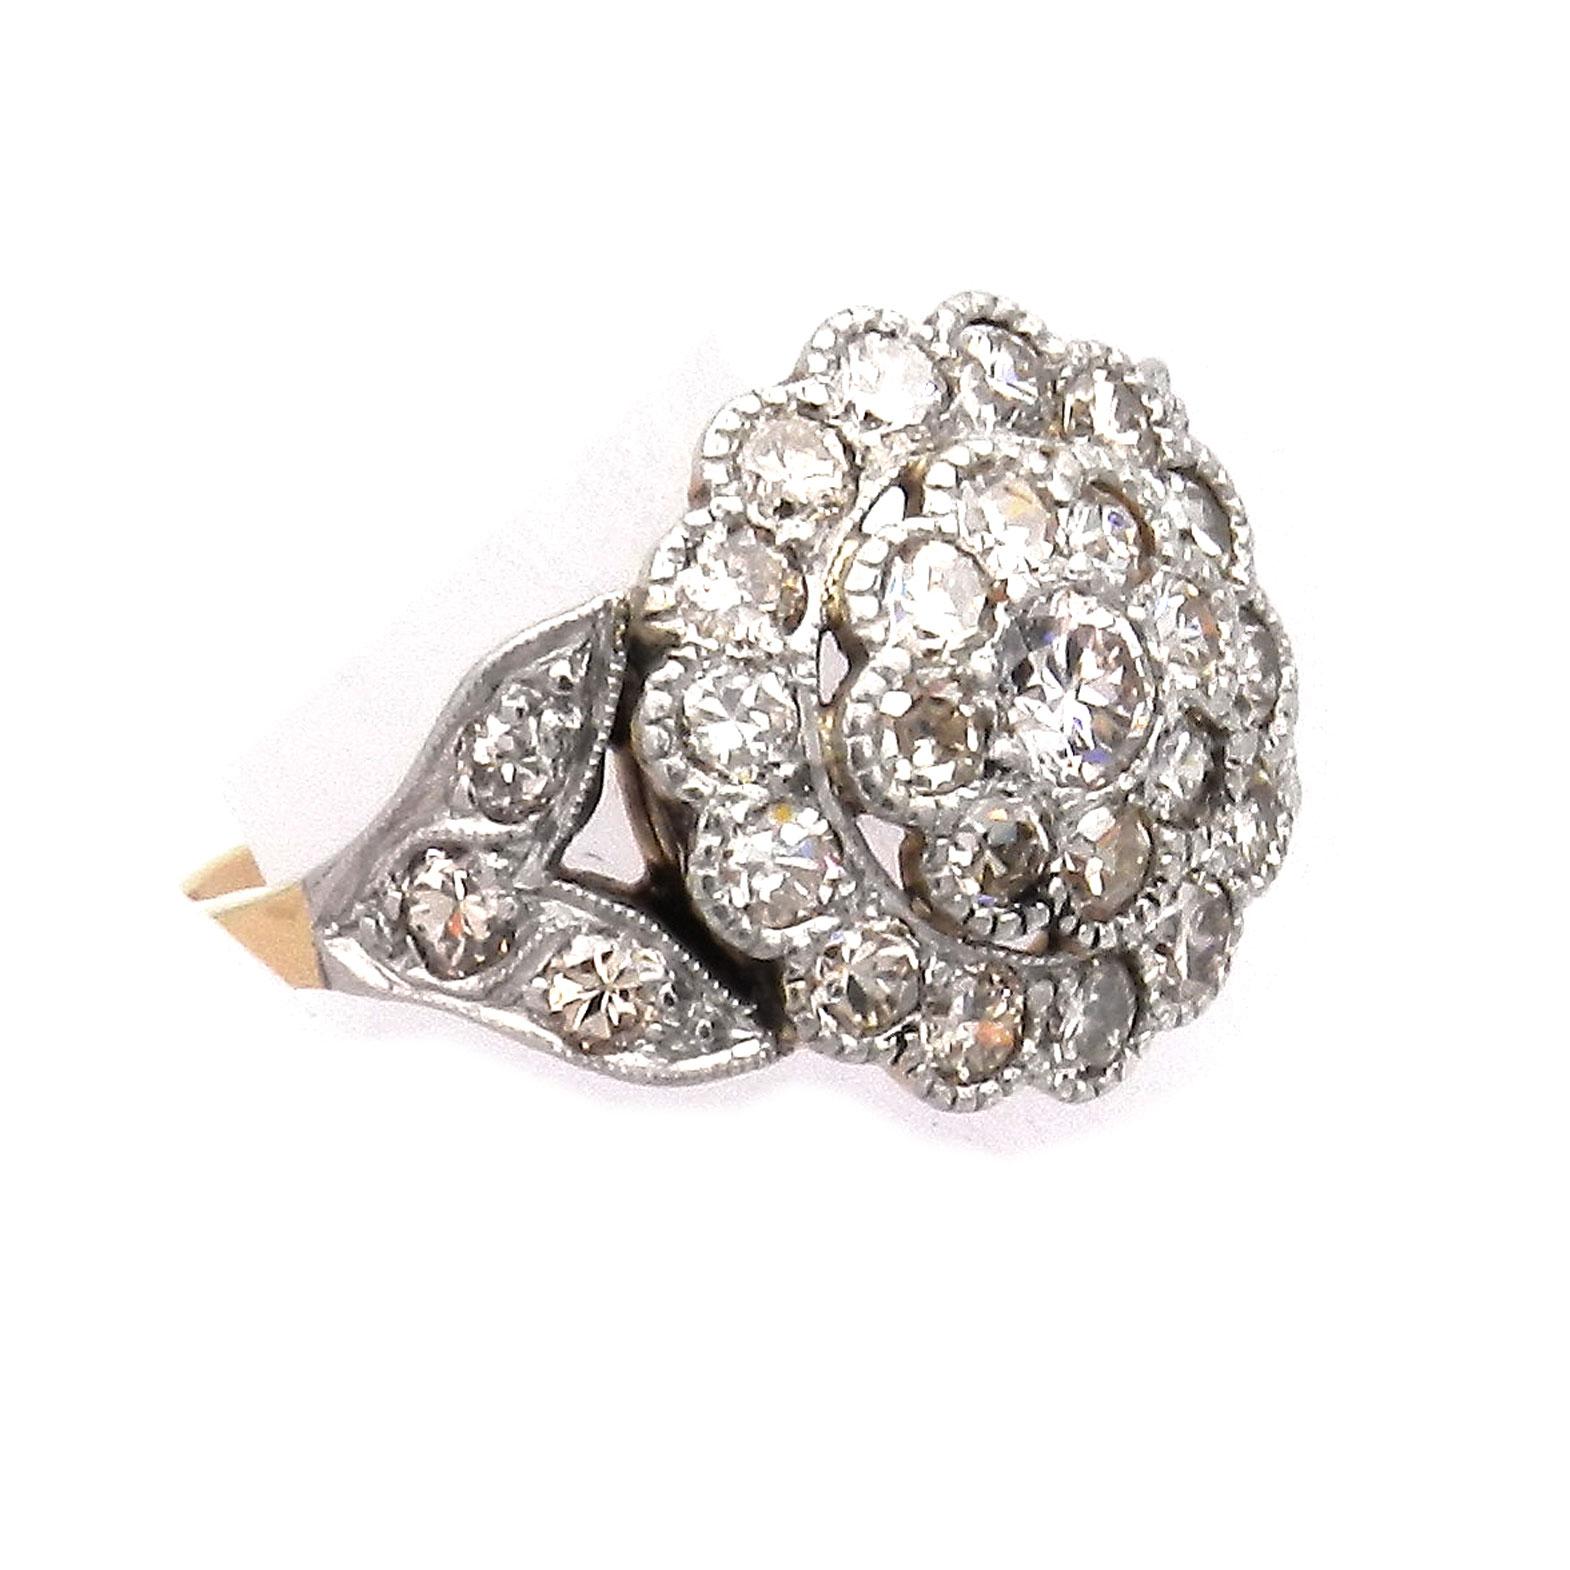 Antique 1.65 Carat Diamond 14K Gold and Platinum Ring circa 1910

Very decorative diamond ring with a flower-shaped ring head made of yellow gold and platinum, the stepped rosette set with 23 radiant old-cut diamonds, flanked on the sides by leaves